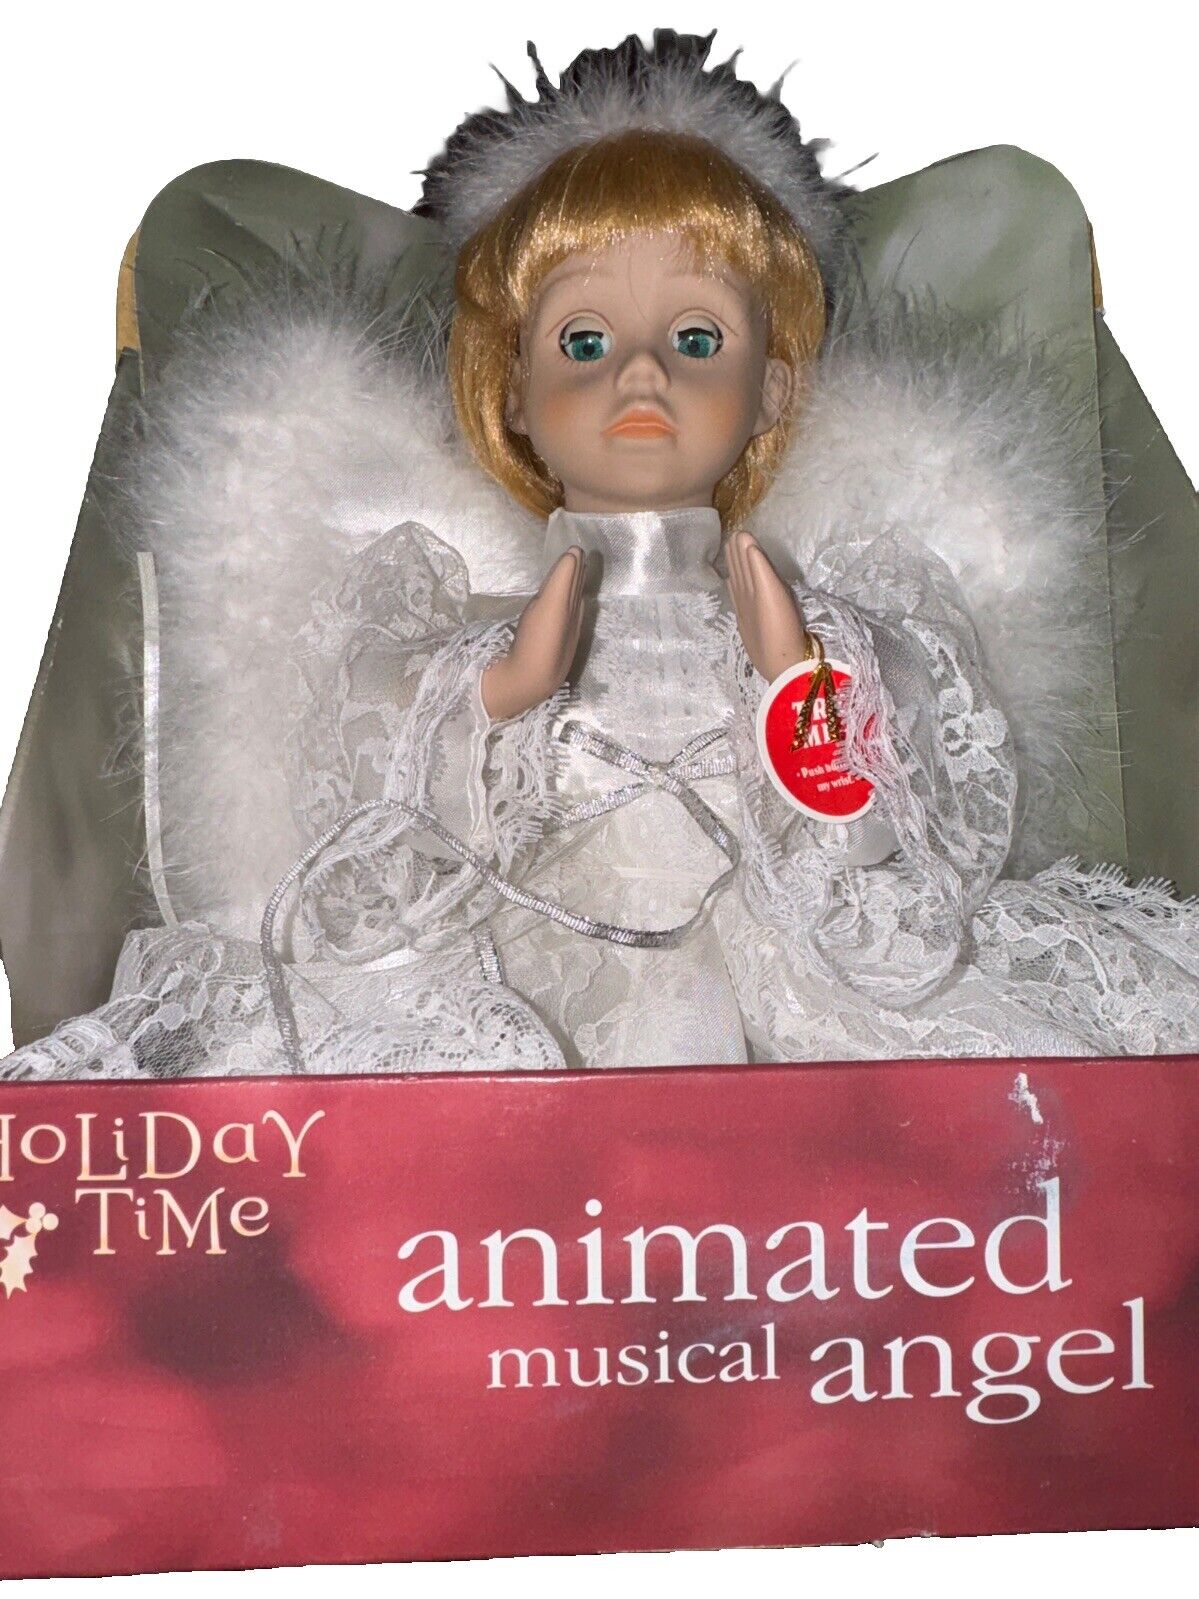 Vintage 2002 Holiday Time The Little Christmas Angel Animated and Musical